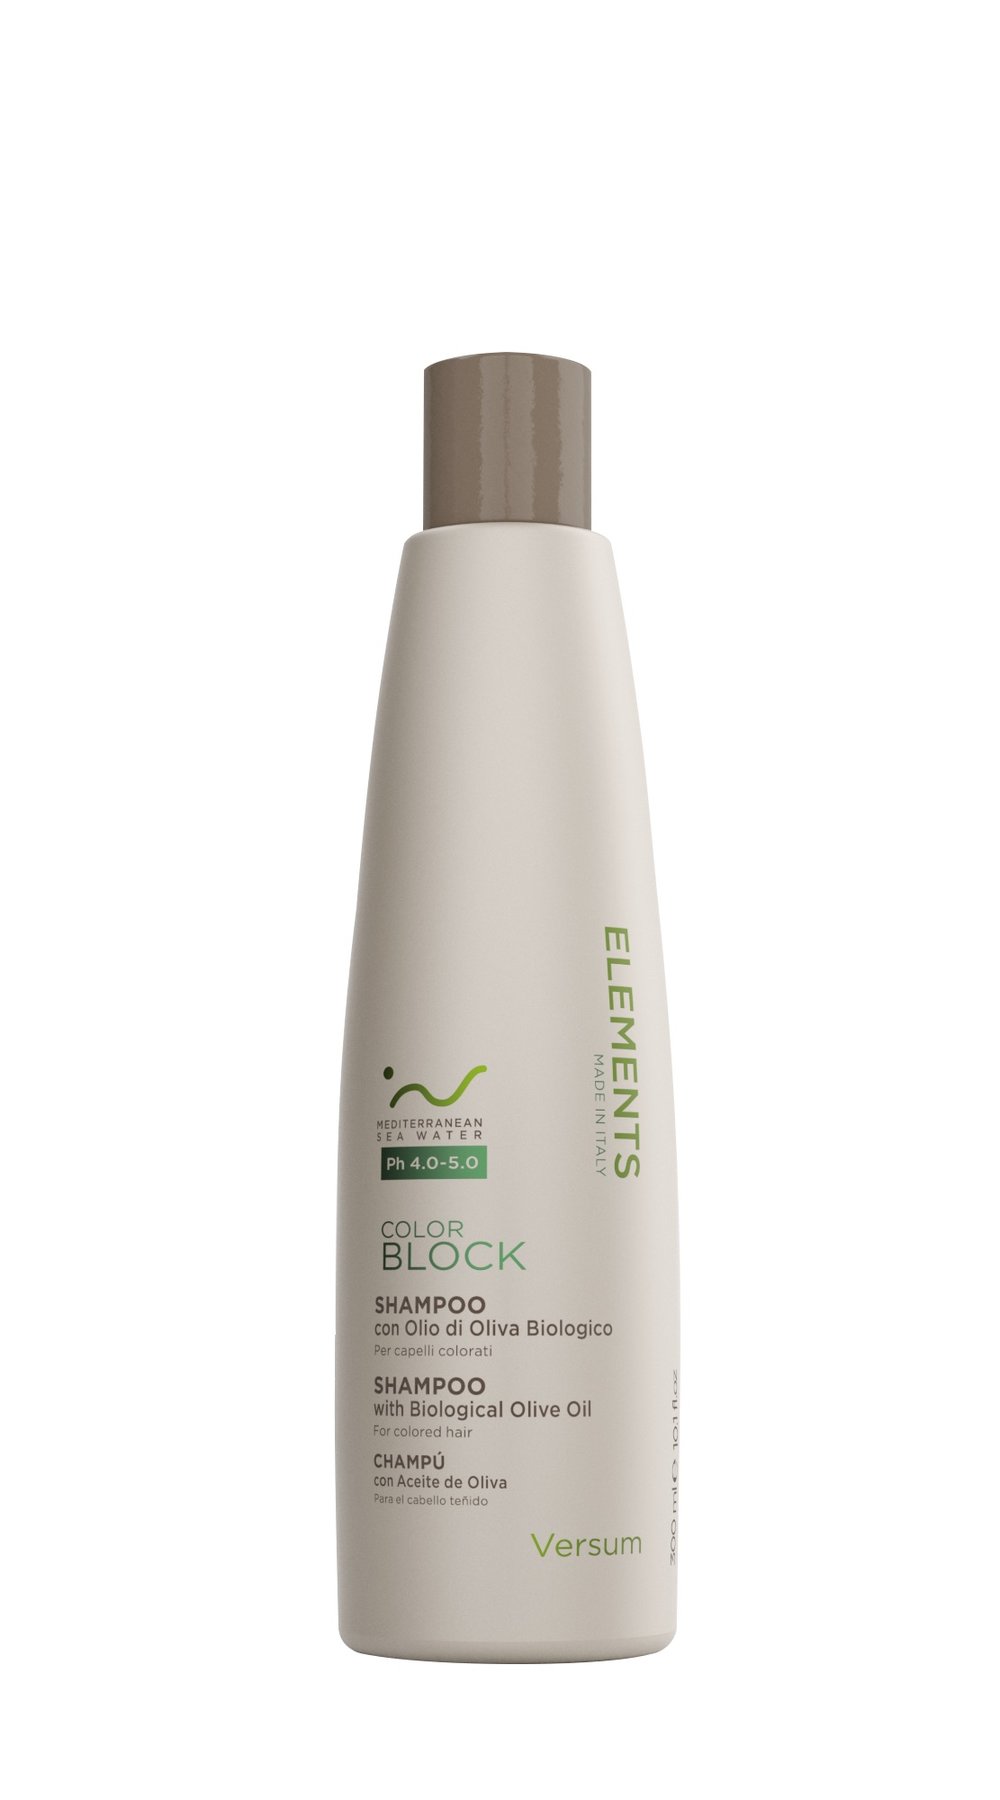 VERSUM ELEMENTS COLOR BLOCK SHAMPOO WITH ORGANIC OLIVE OIL